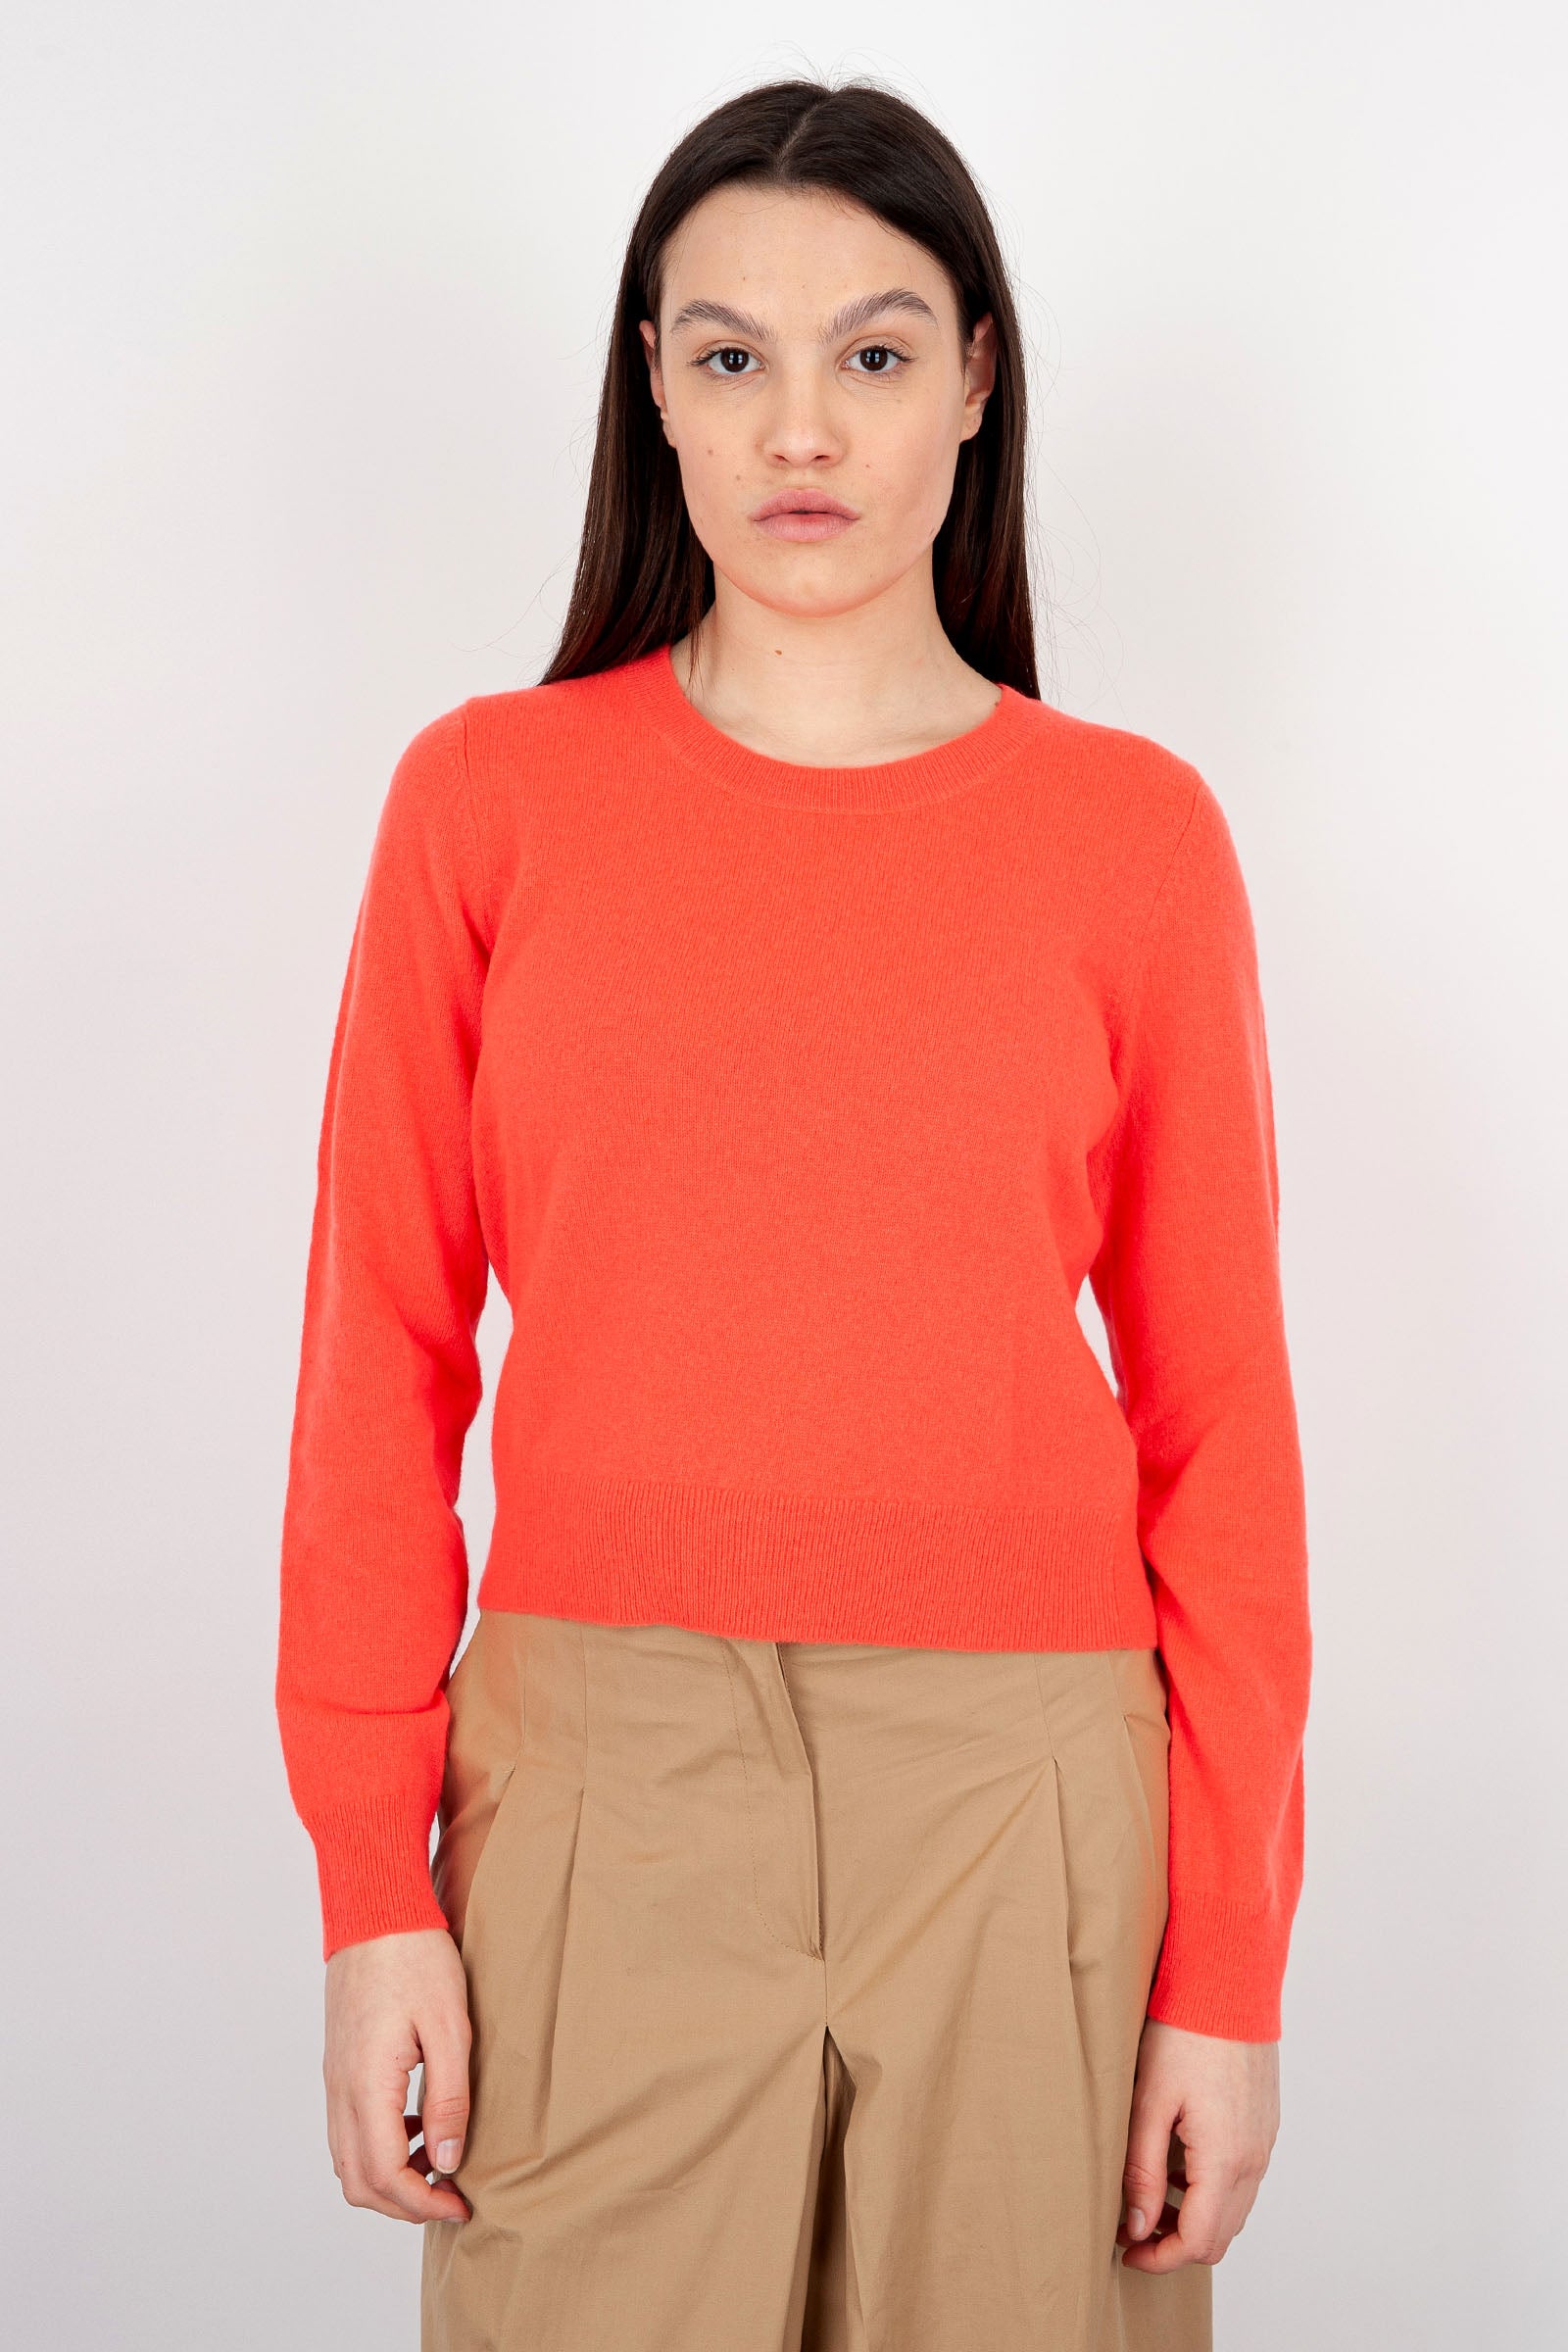 Absolut Cashmere Carlie Crewneck Sweater in Coral Wool - 1